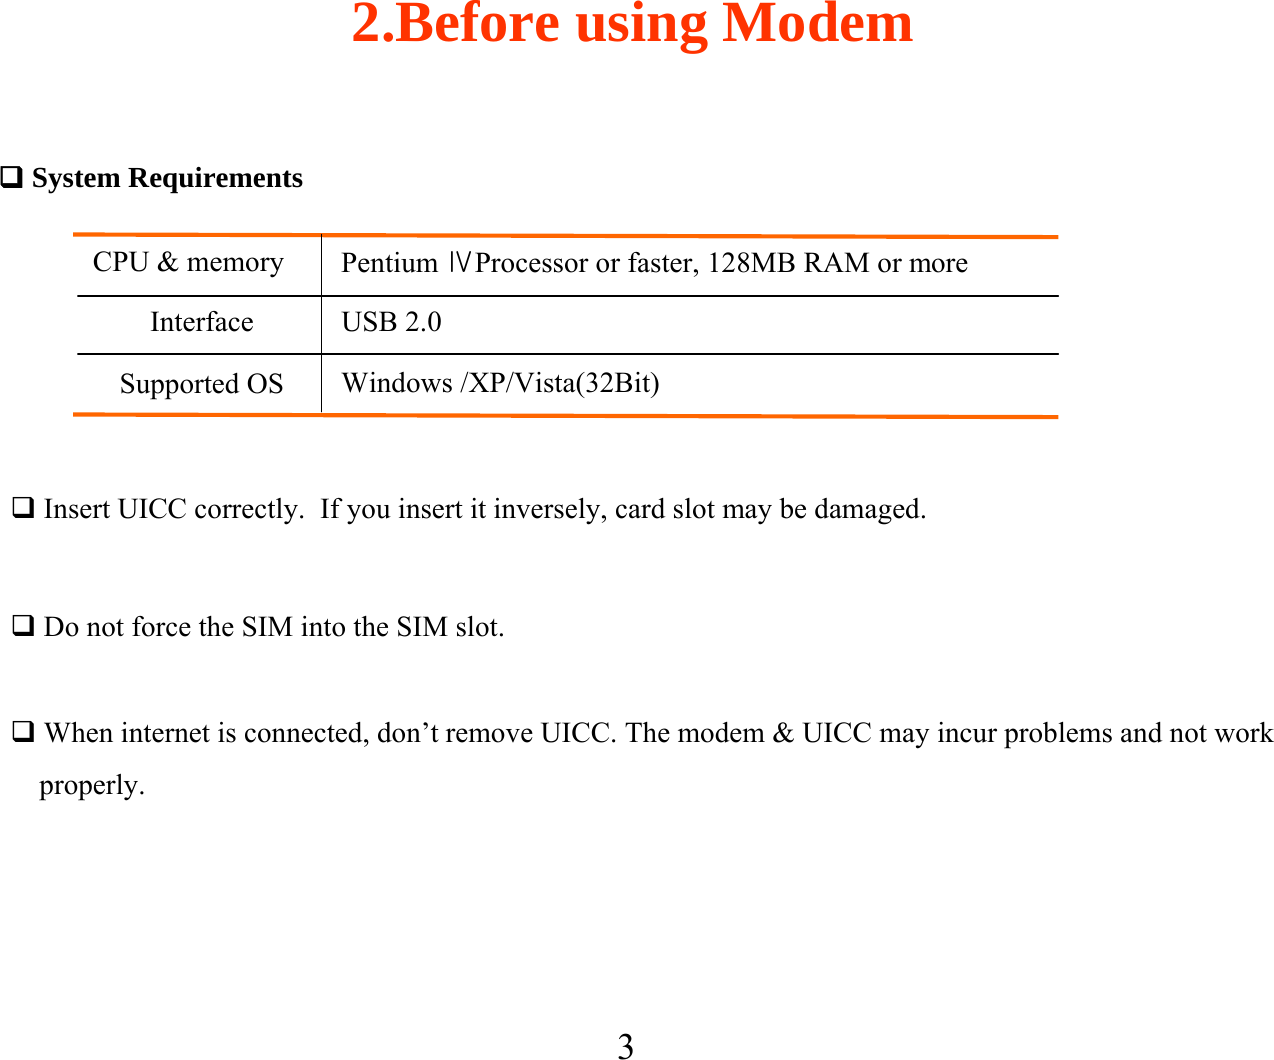 32.Before using ModemSystem RequirementsCPU &amp; memory Pentium ⅣProcessor or faster, 128MB RAM or moreInterface USB 2.0Supported OS Windows /XP/Vista(32Bit)When internet is connected, don’t remove UICC. The modem &amp; UICC may incur problems and not workproperly.Do not force the SIM into the SIM slot.Insert UICC correctly.  If you insert it inversely, card slot may be damaged.